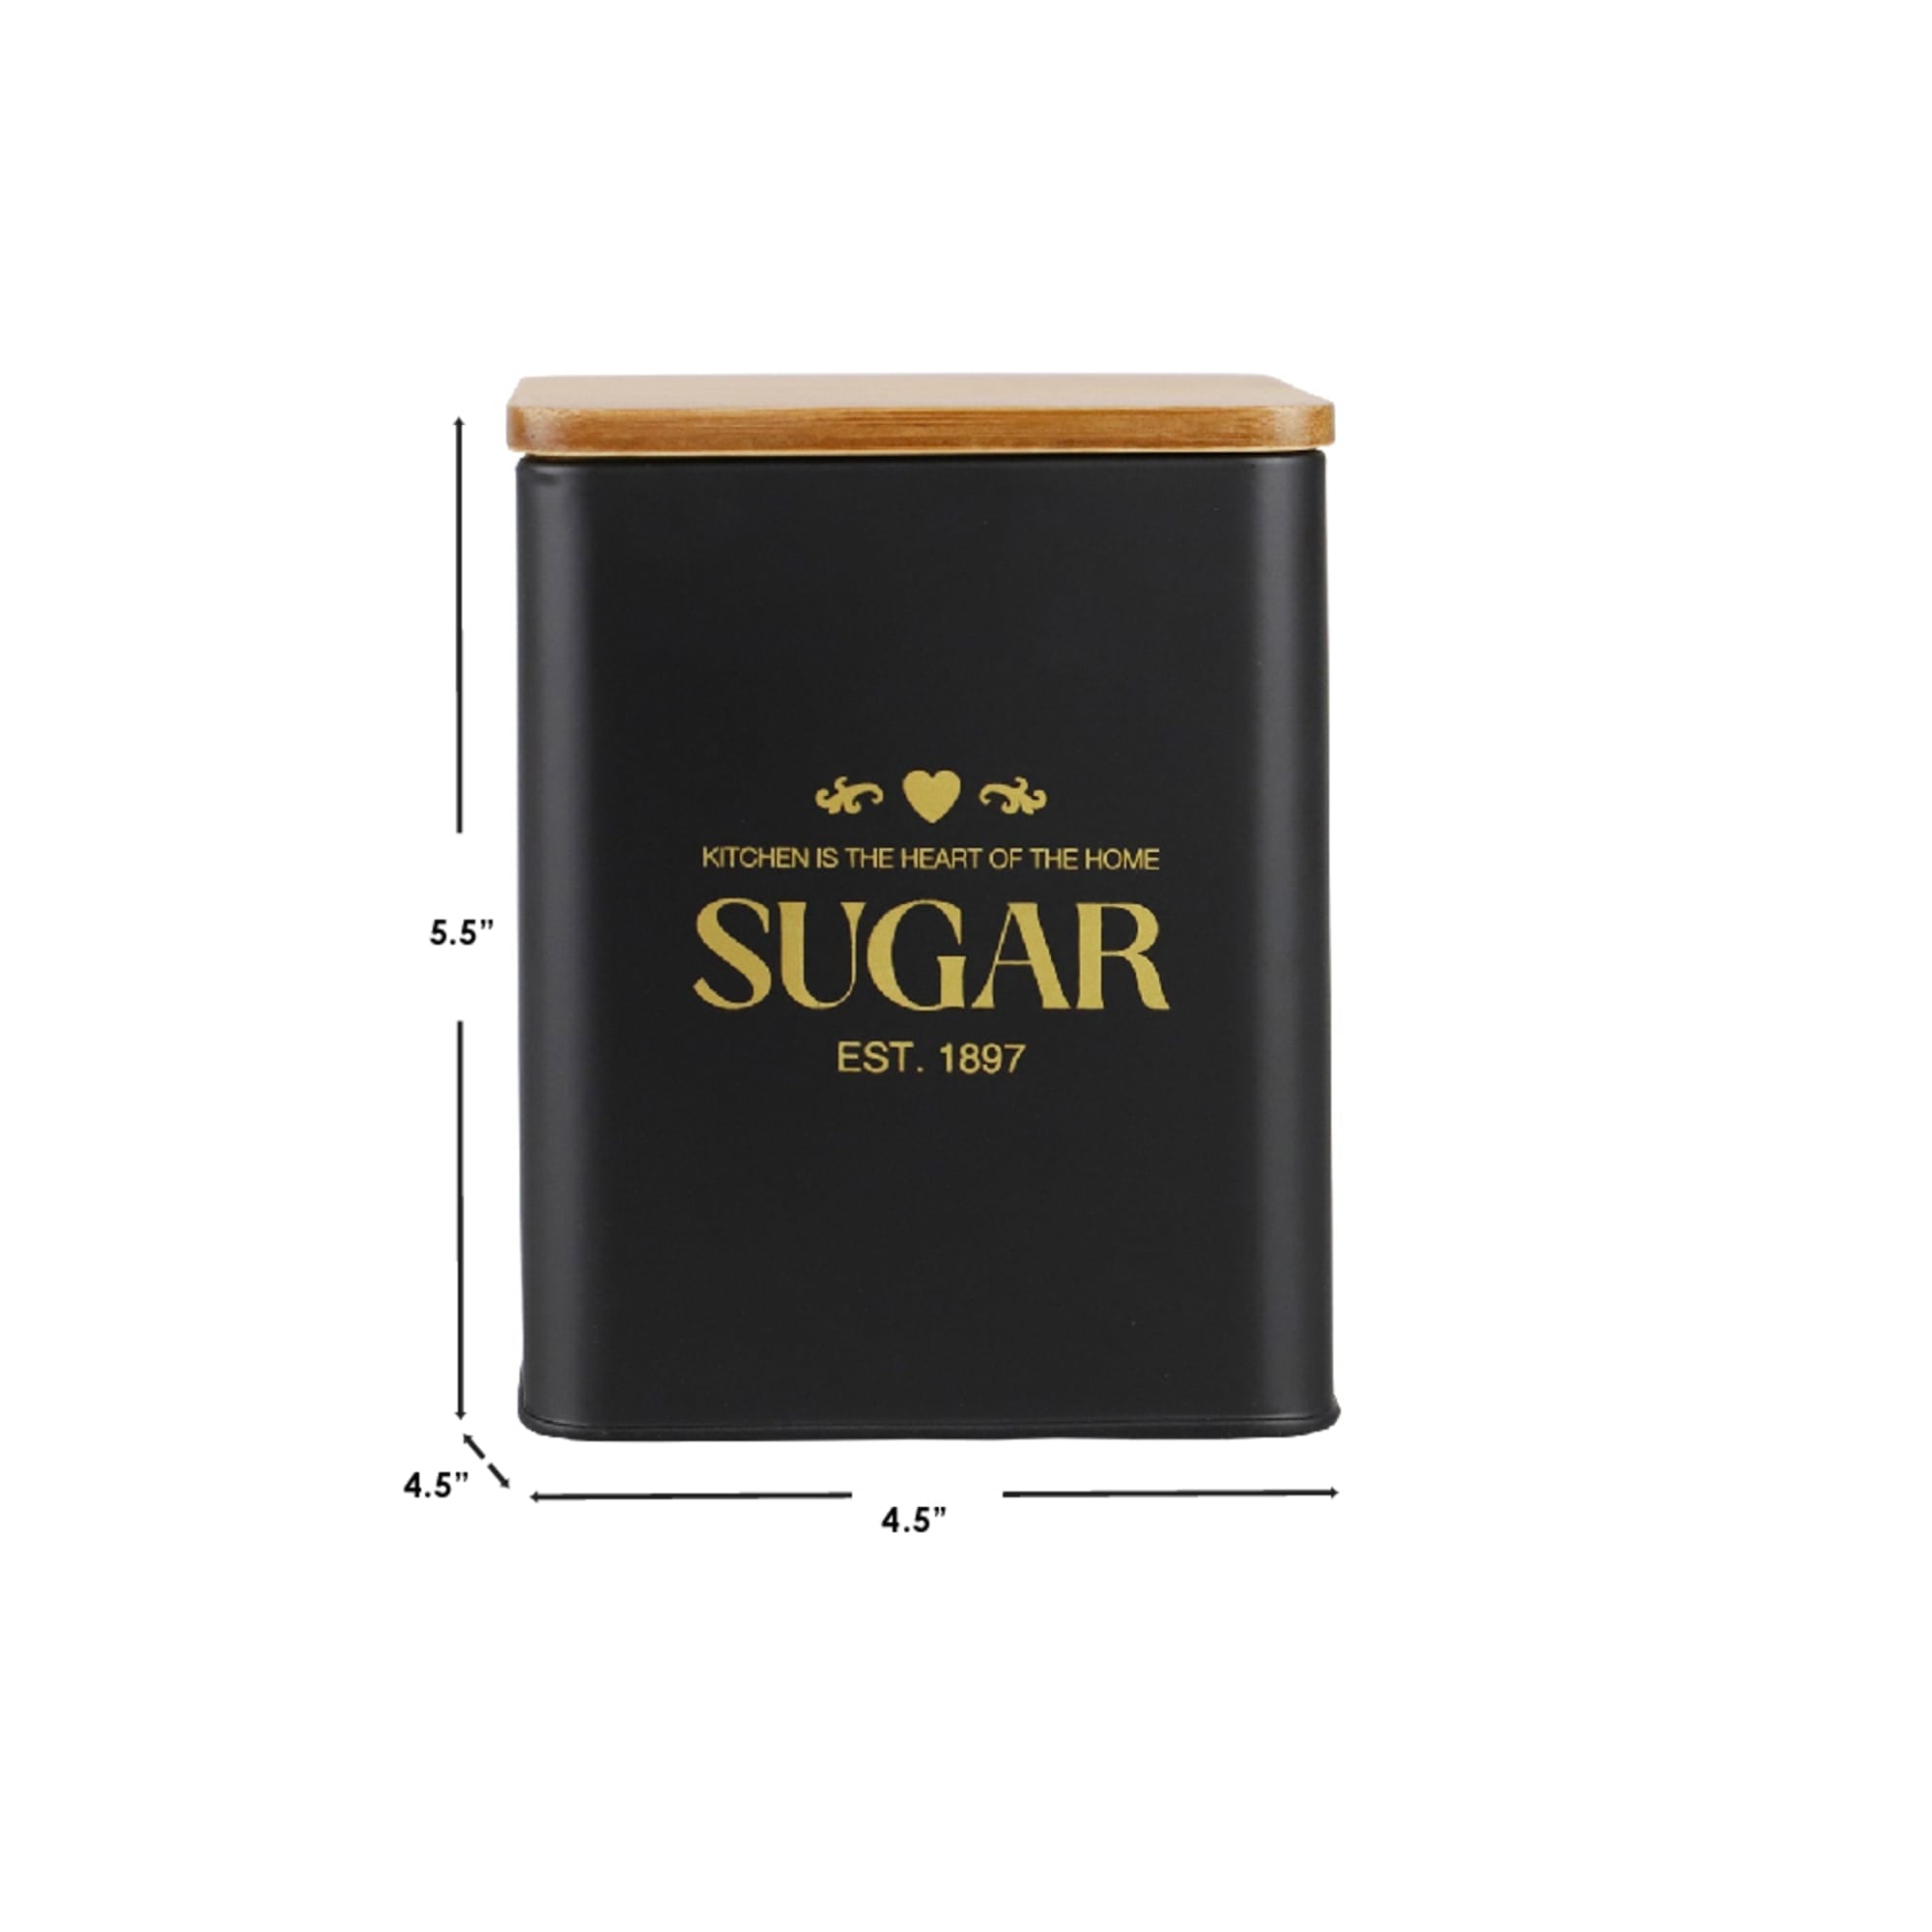 Home Basics Bistro 50 oz. Tin Sugar Canister with Bamboo Top, Black $6.00 EACH, CASE PACK OF 12